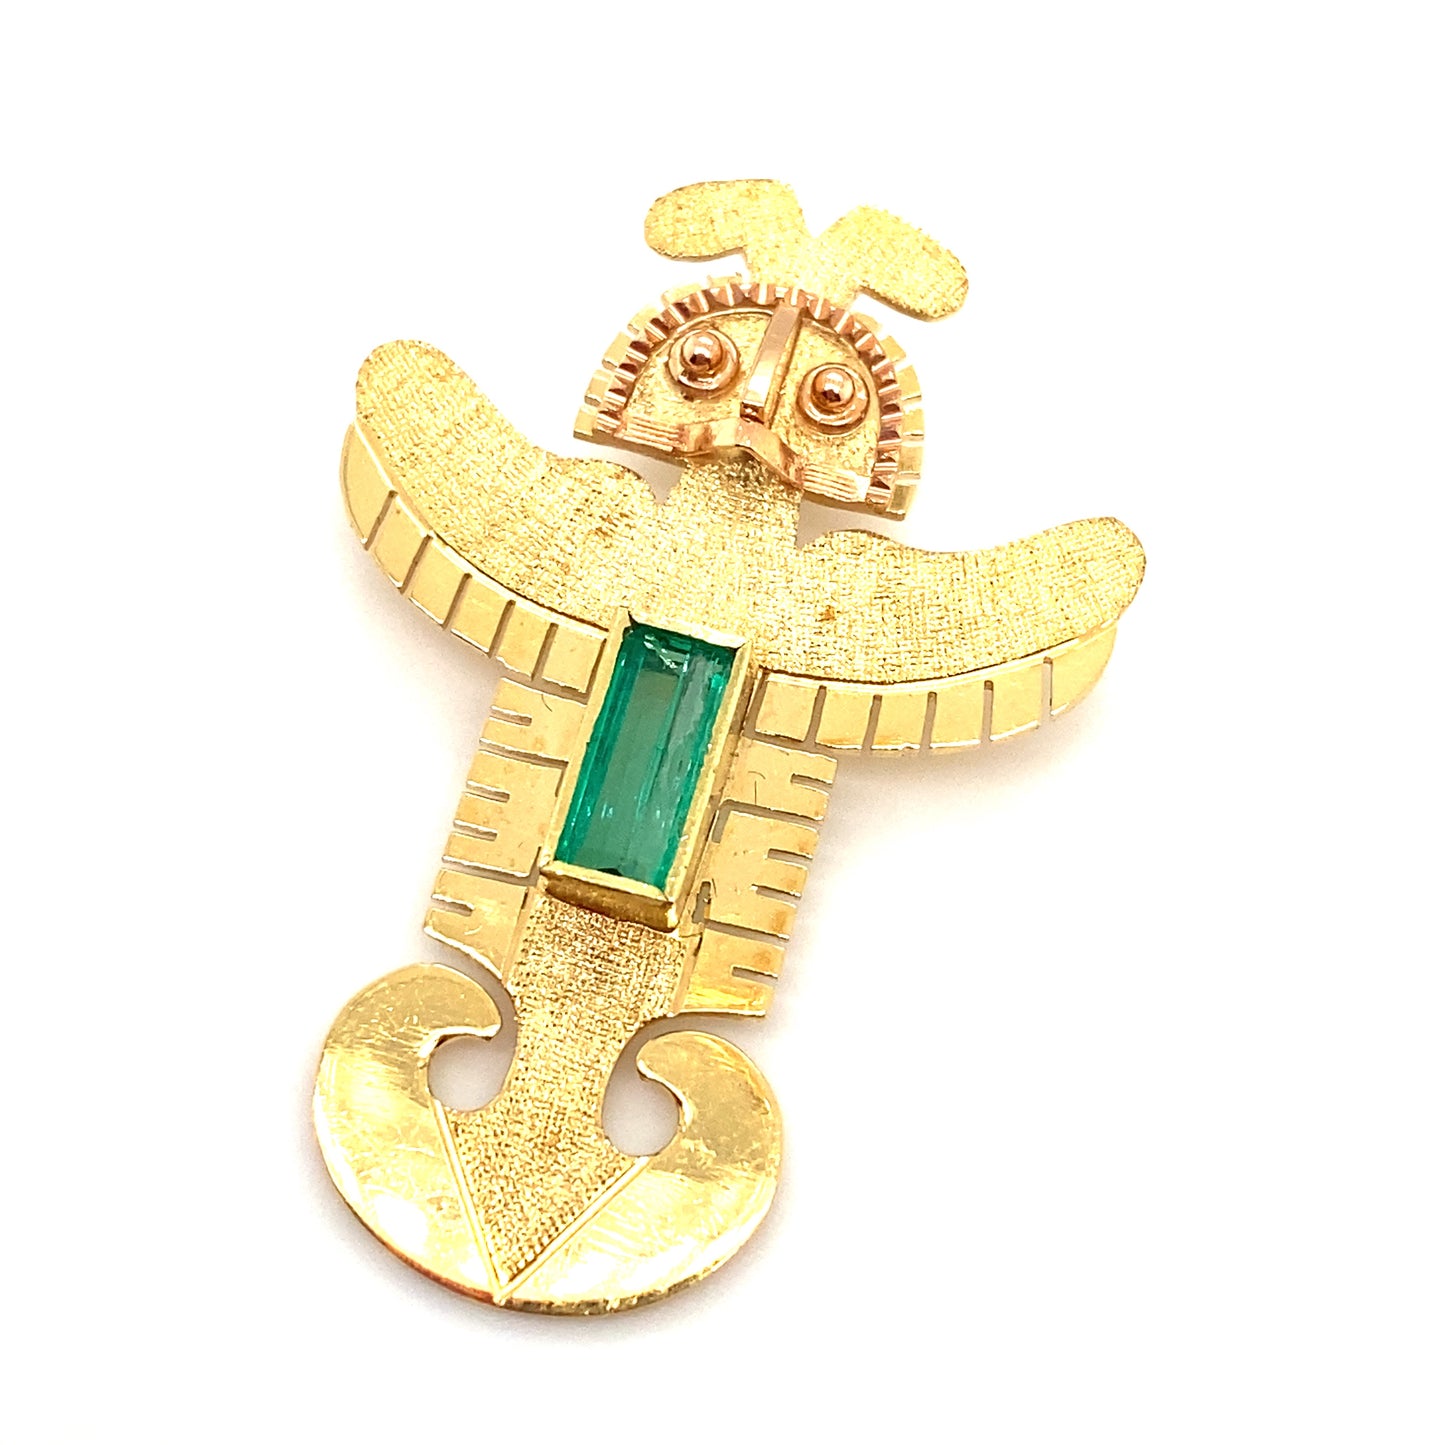 Circa 1980s Mayan Goddess Pendant with Colombian Emerald in 18K Gold